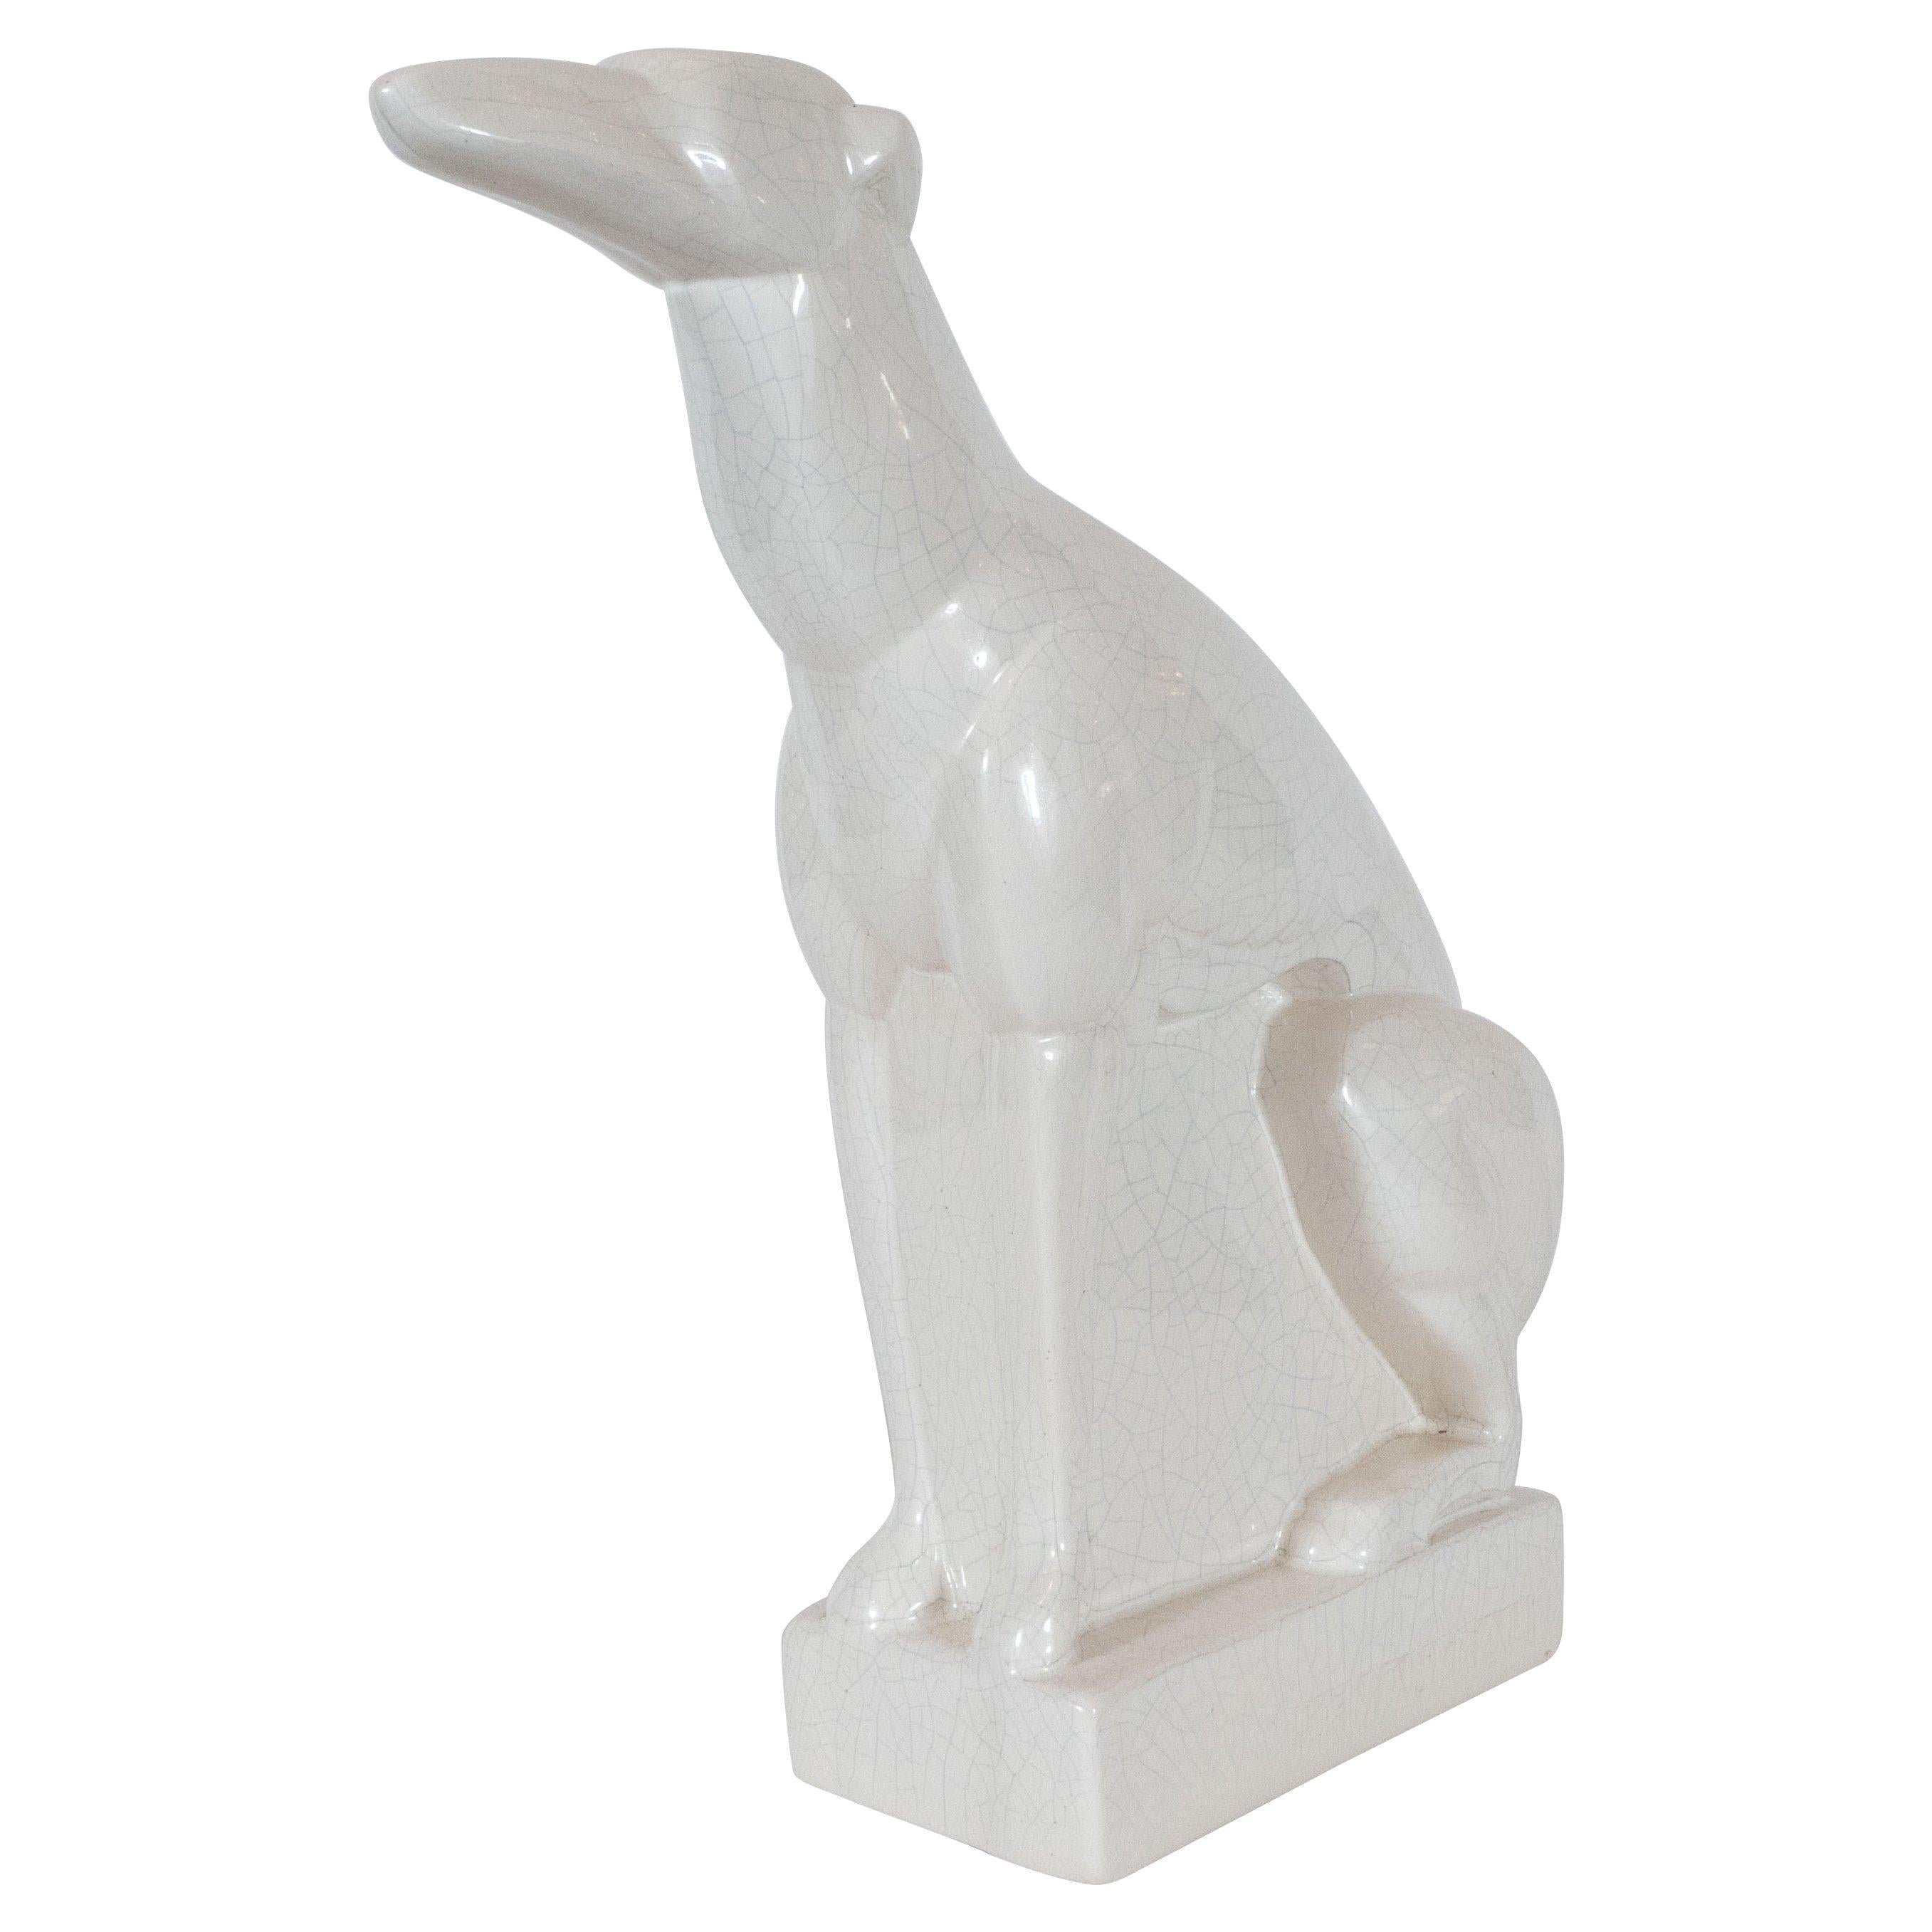 French Art Deco Craqueleur White Ceramic Greyhound Signed by Charles Lemanceau For Sale